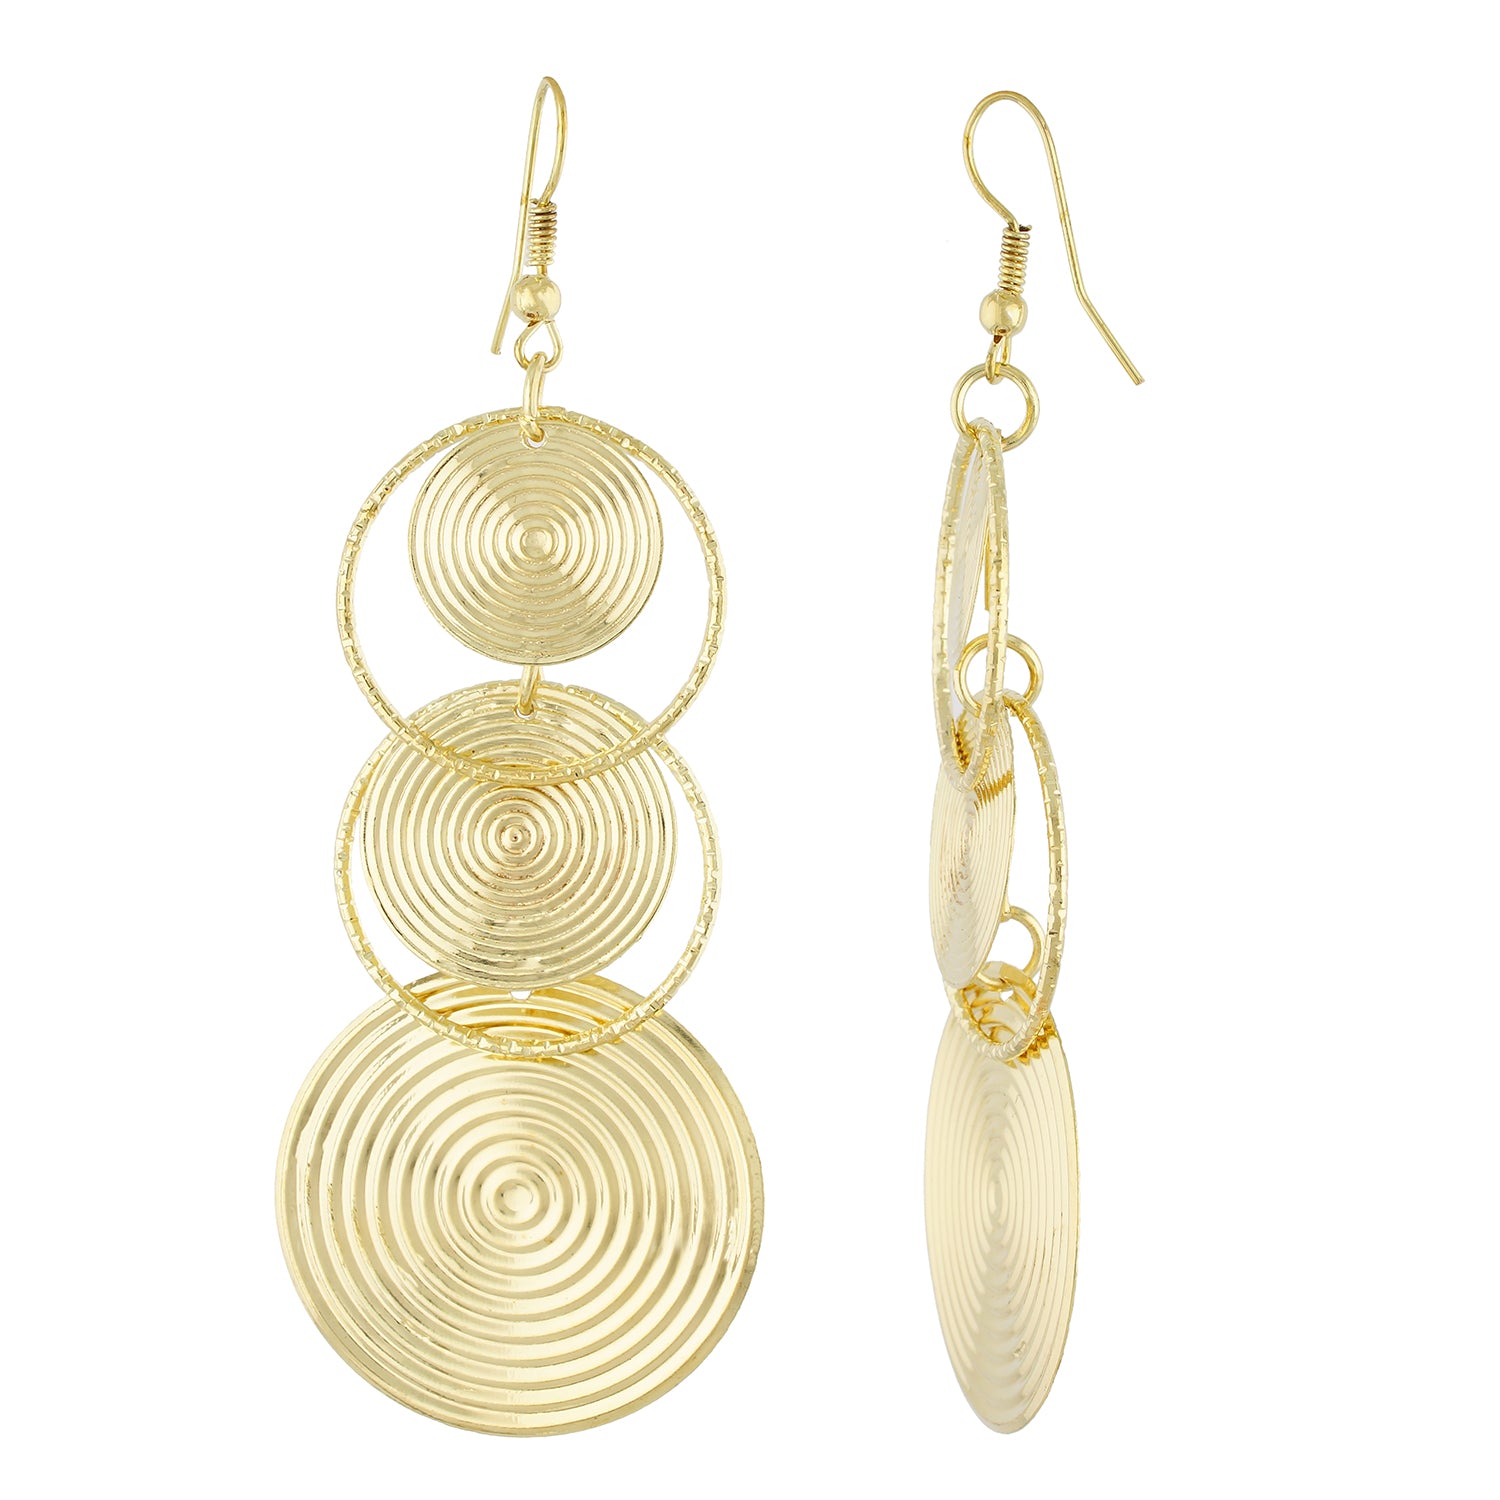 Gold Colour Round Shape Ear Long Hangings for Girls and Womens